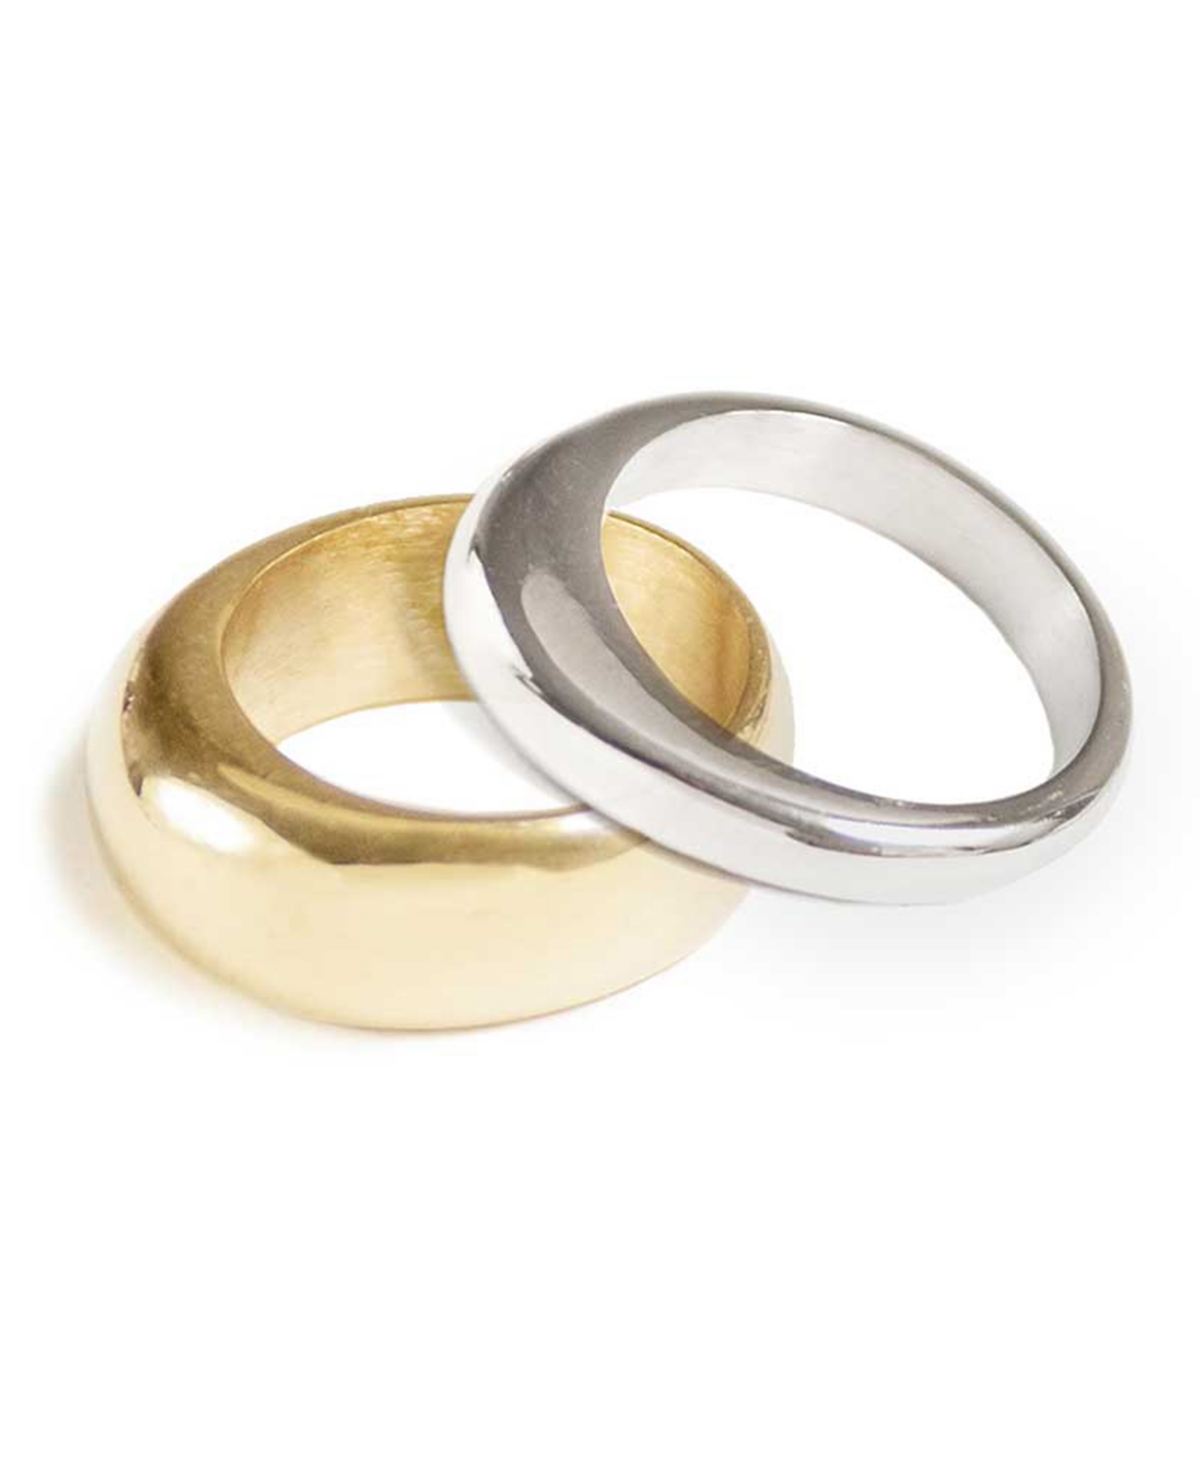 24K Gold-Plated Mixed Metal Stacking Rings 2 Piece Set - Gold  Silver